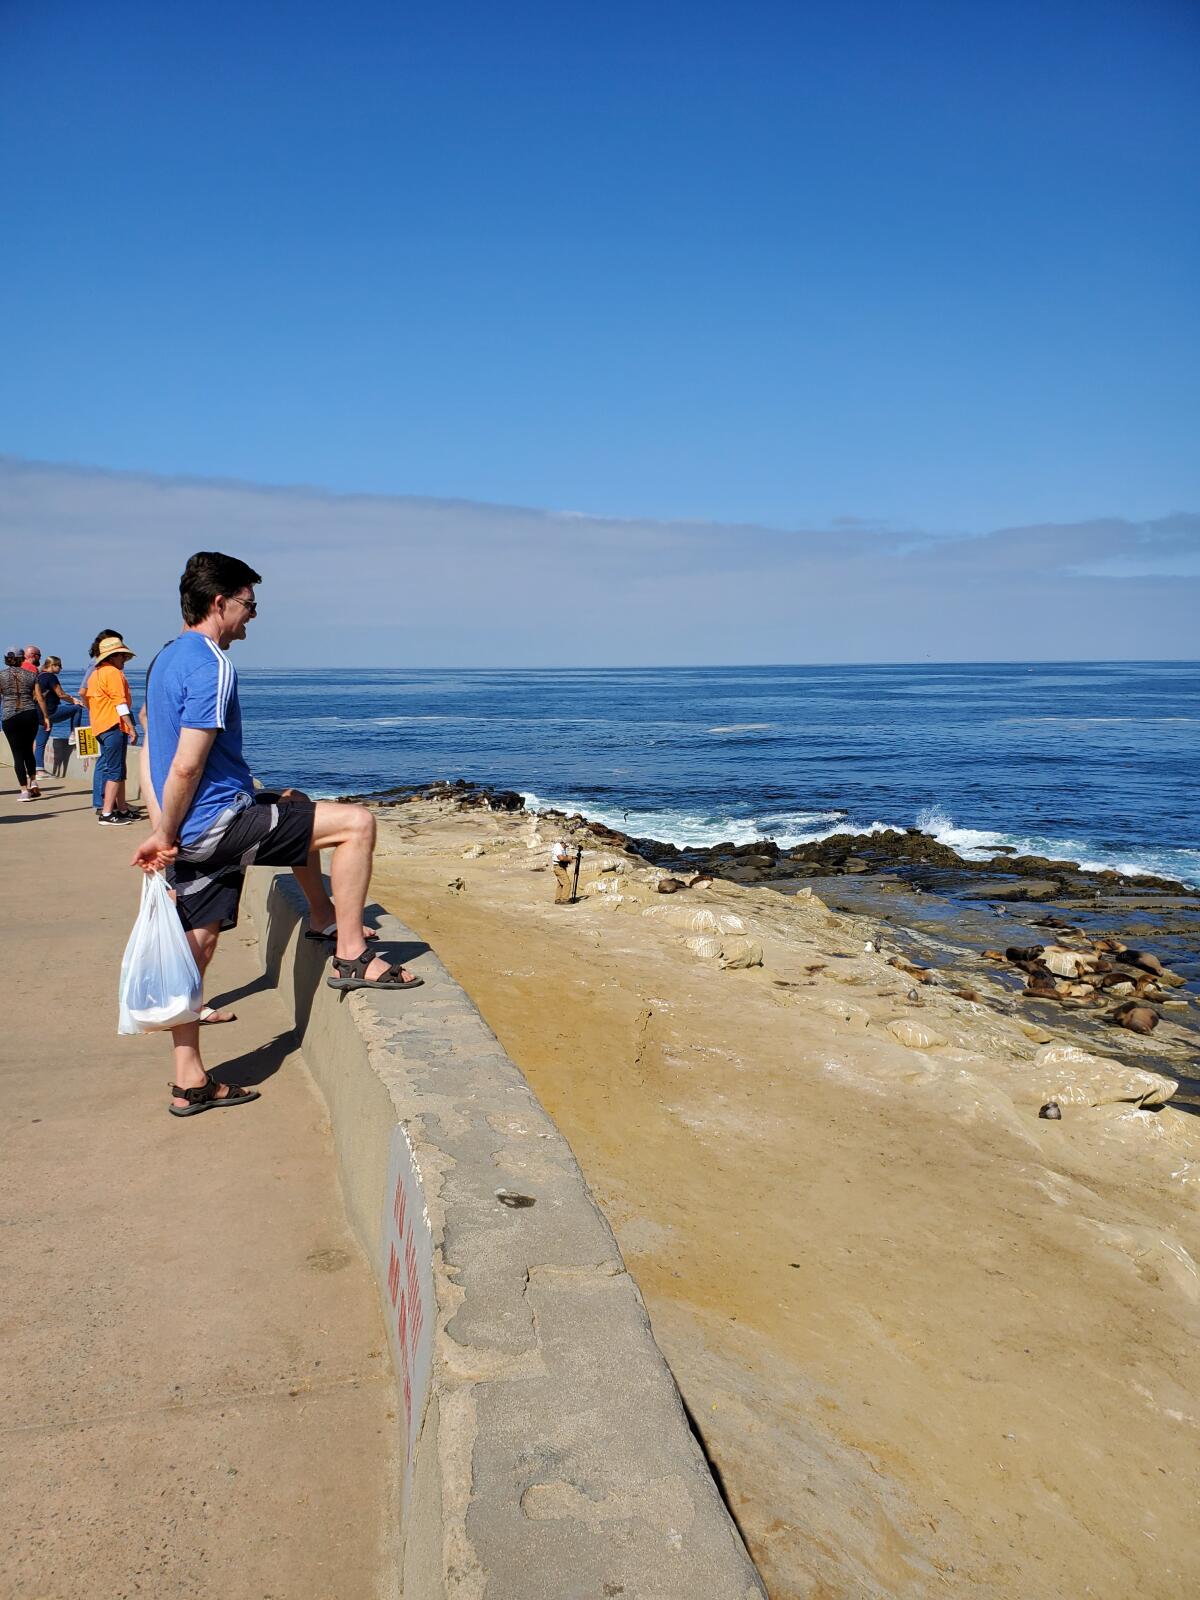 Visitors to Point La Jolla view the sea lions from behind the short wall separating the sidewalk from the bluffs.